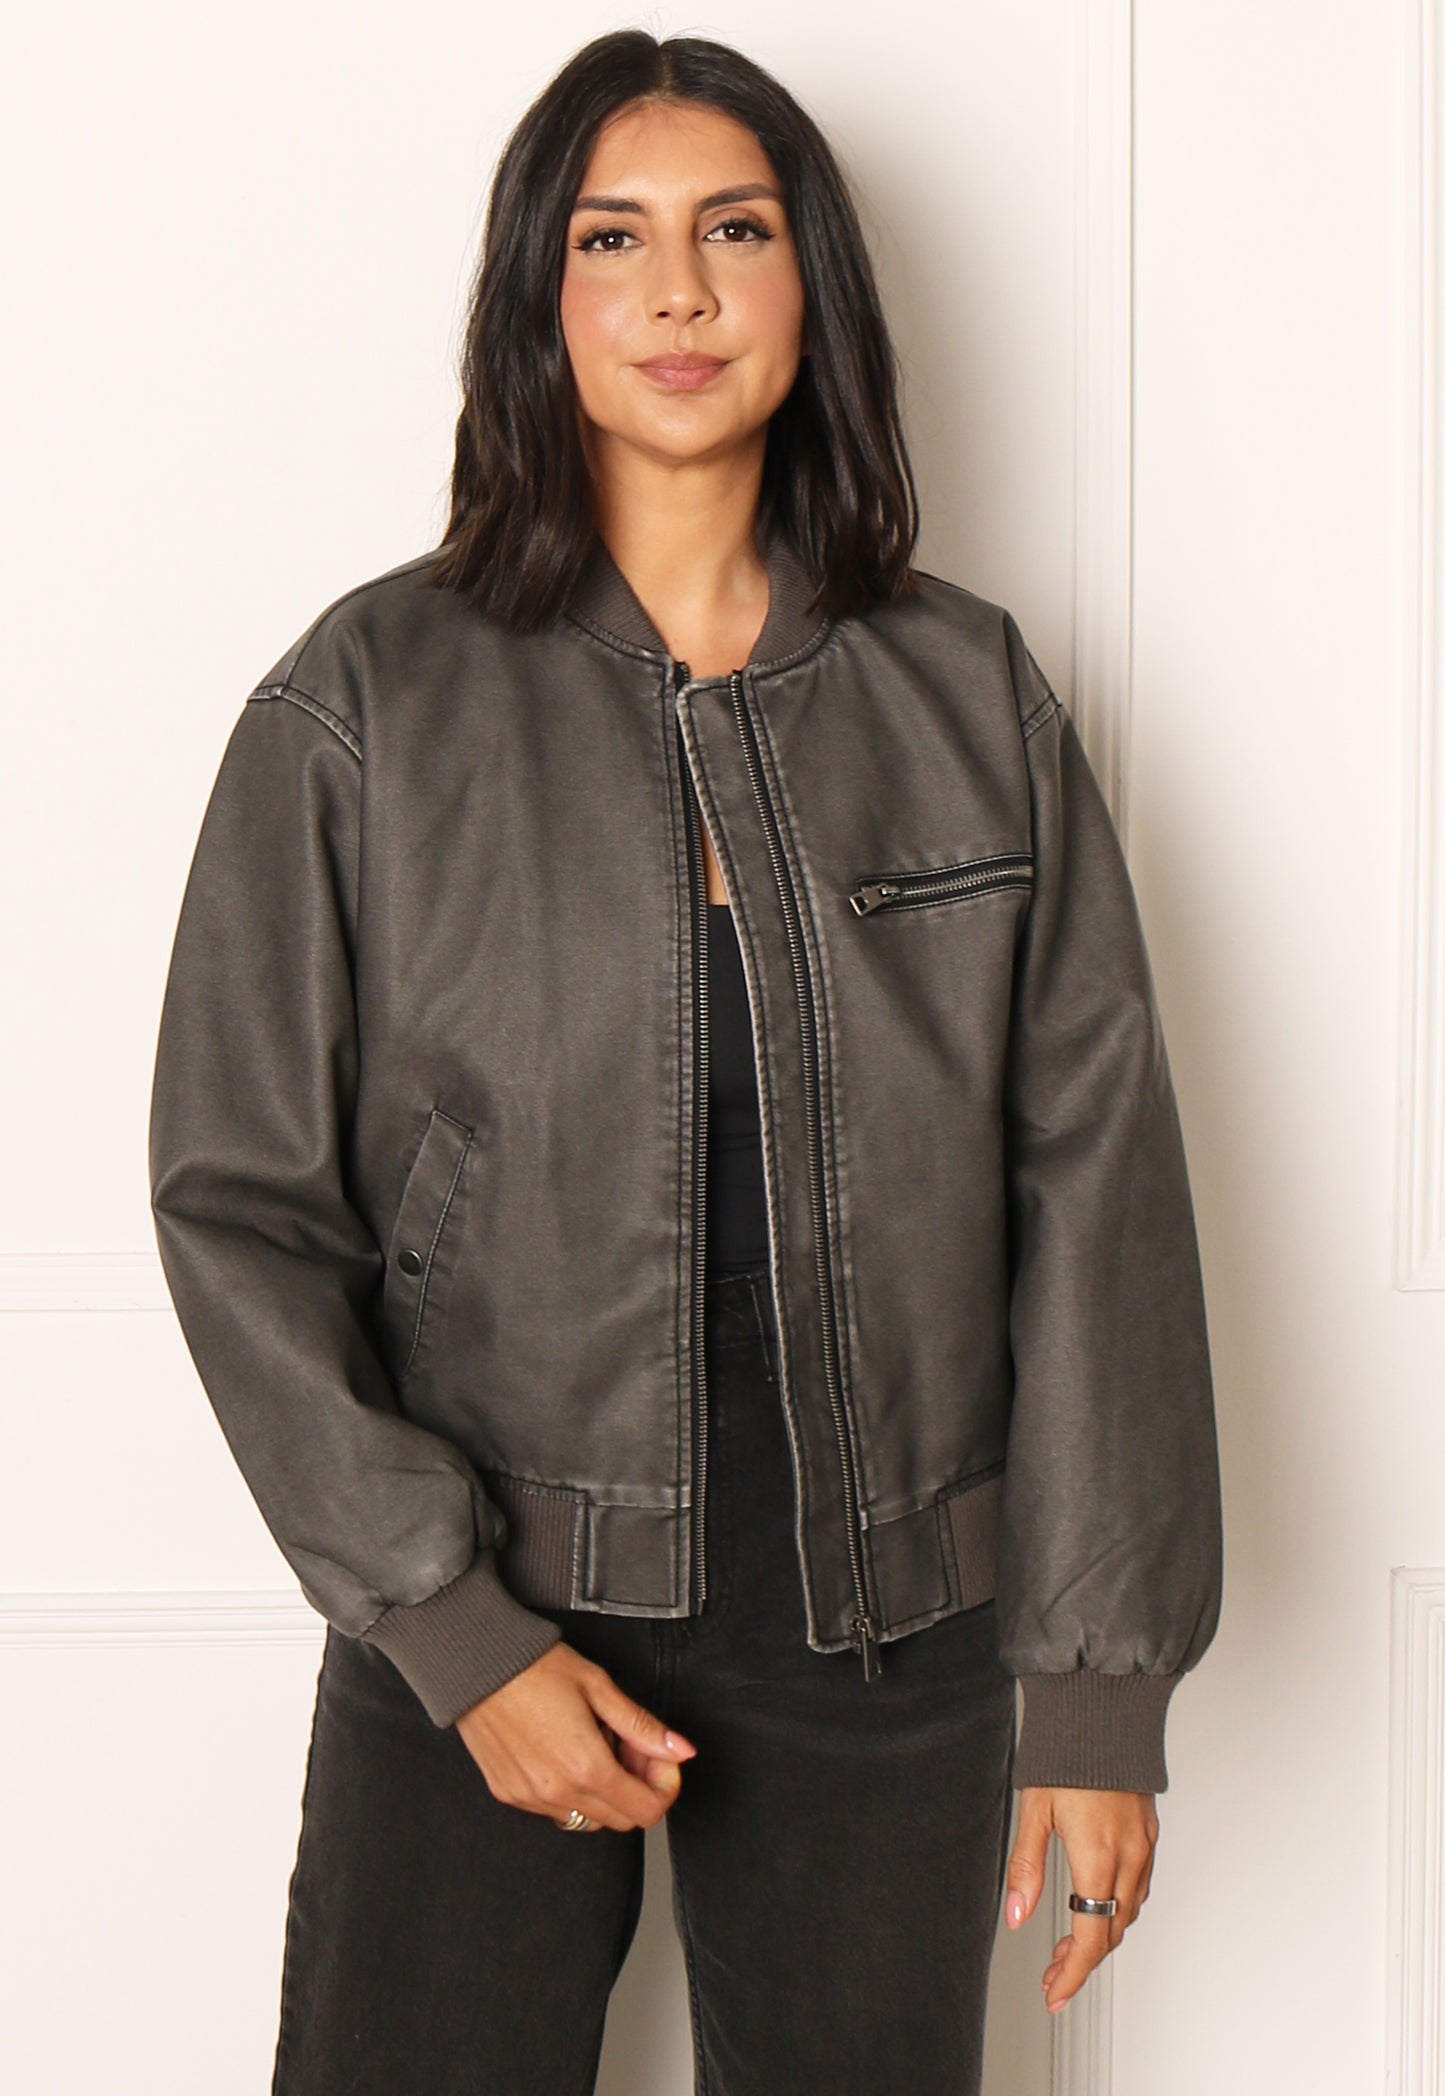 VERO MODA Ivy Vintage Look Faux Leather Bomber Jacket in Washed Black - One Nation Clothing